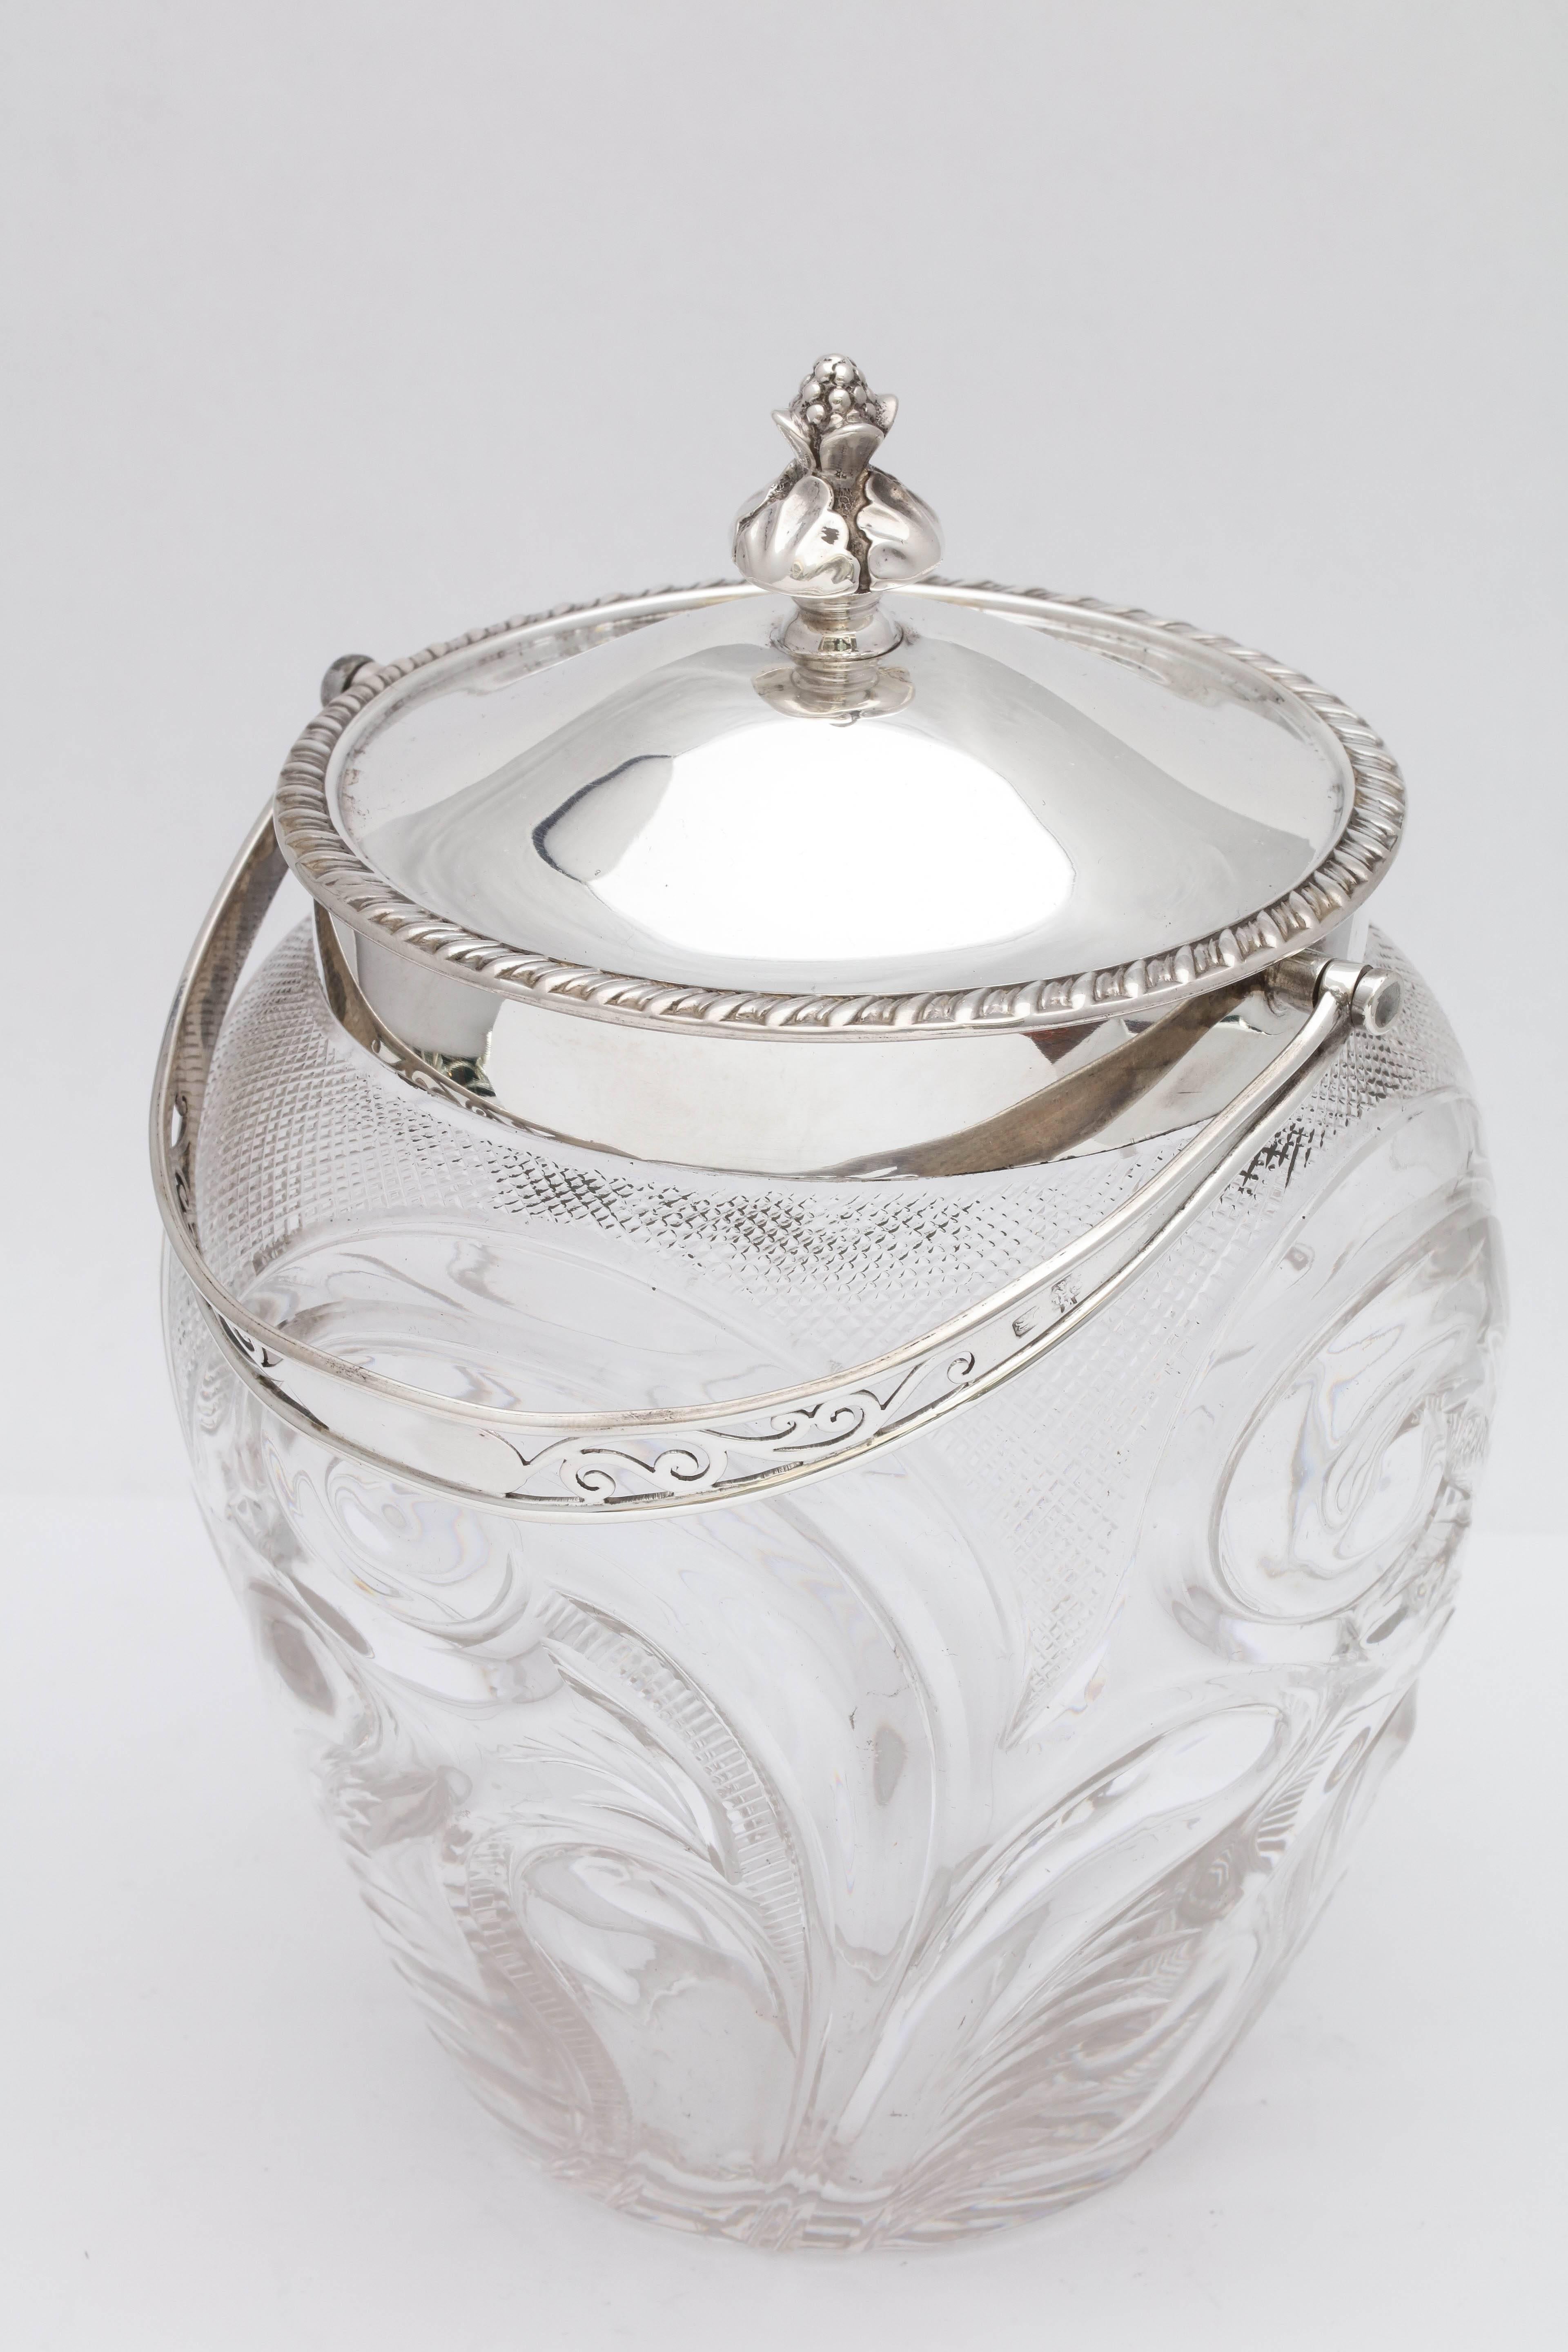 Early 20th Century Edwardian Sterling Silver-Mounted Cut Glass Biscuit Barrel or Ice Bucket